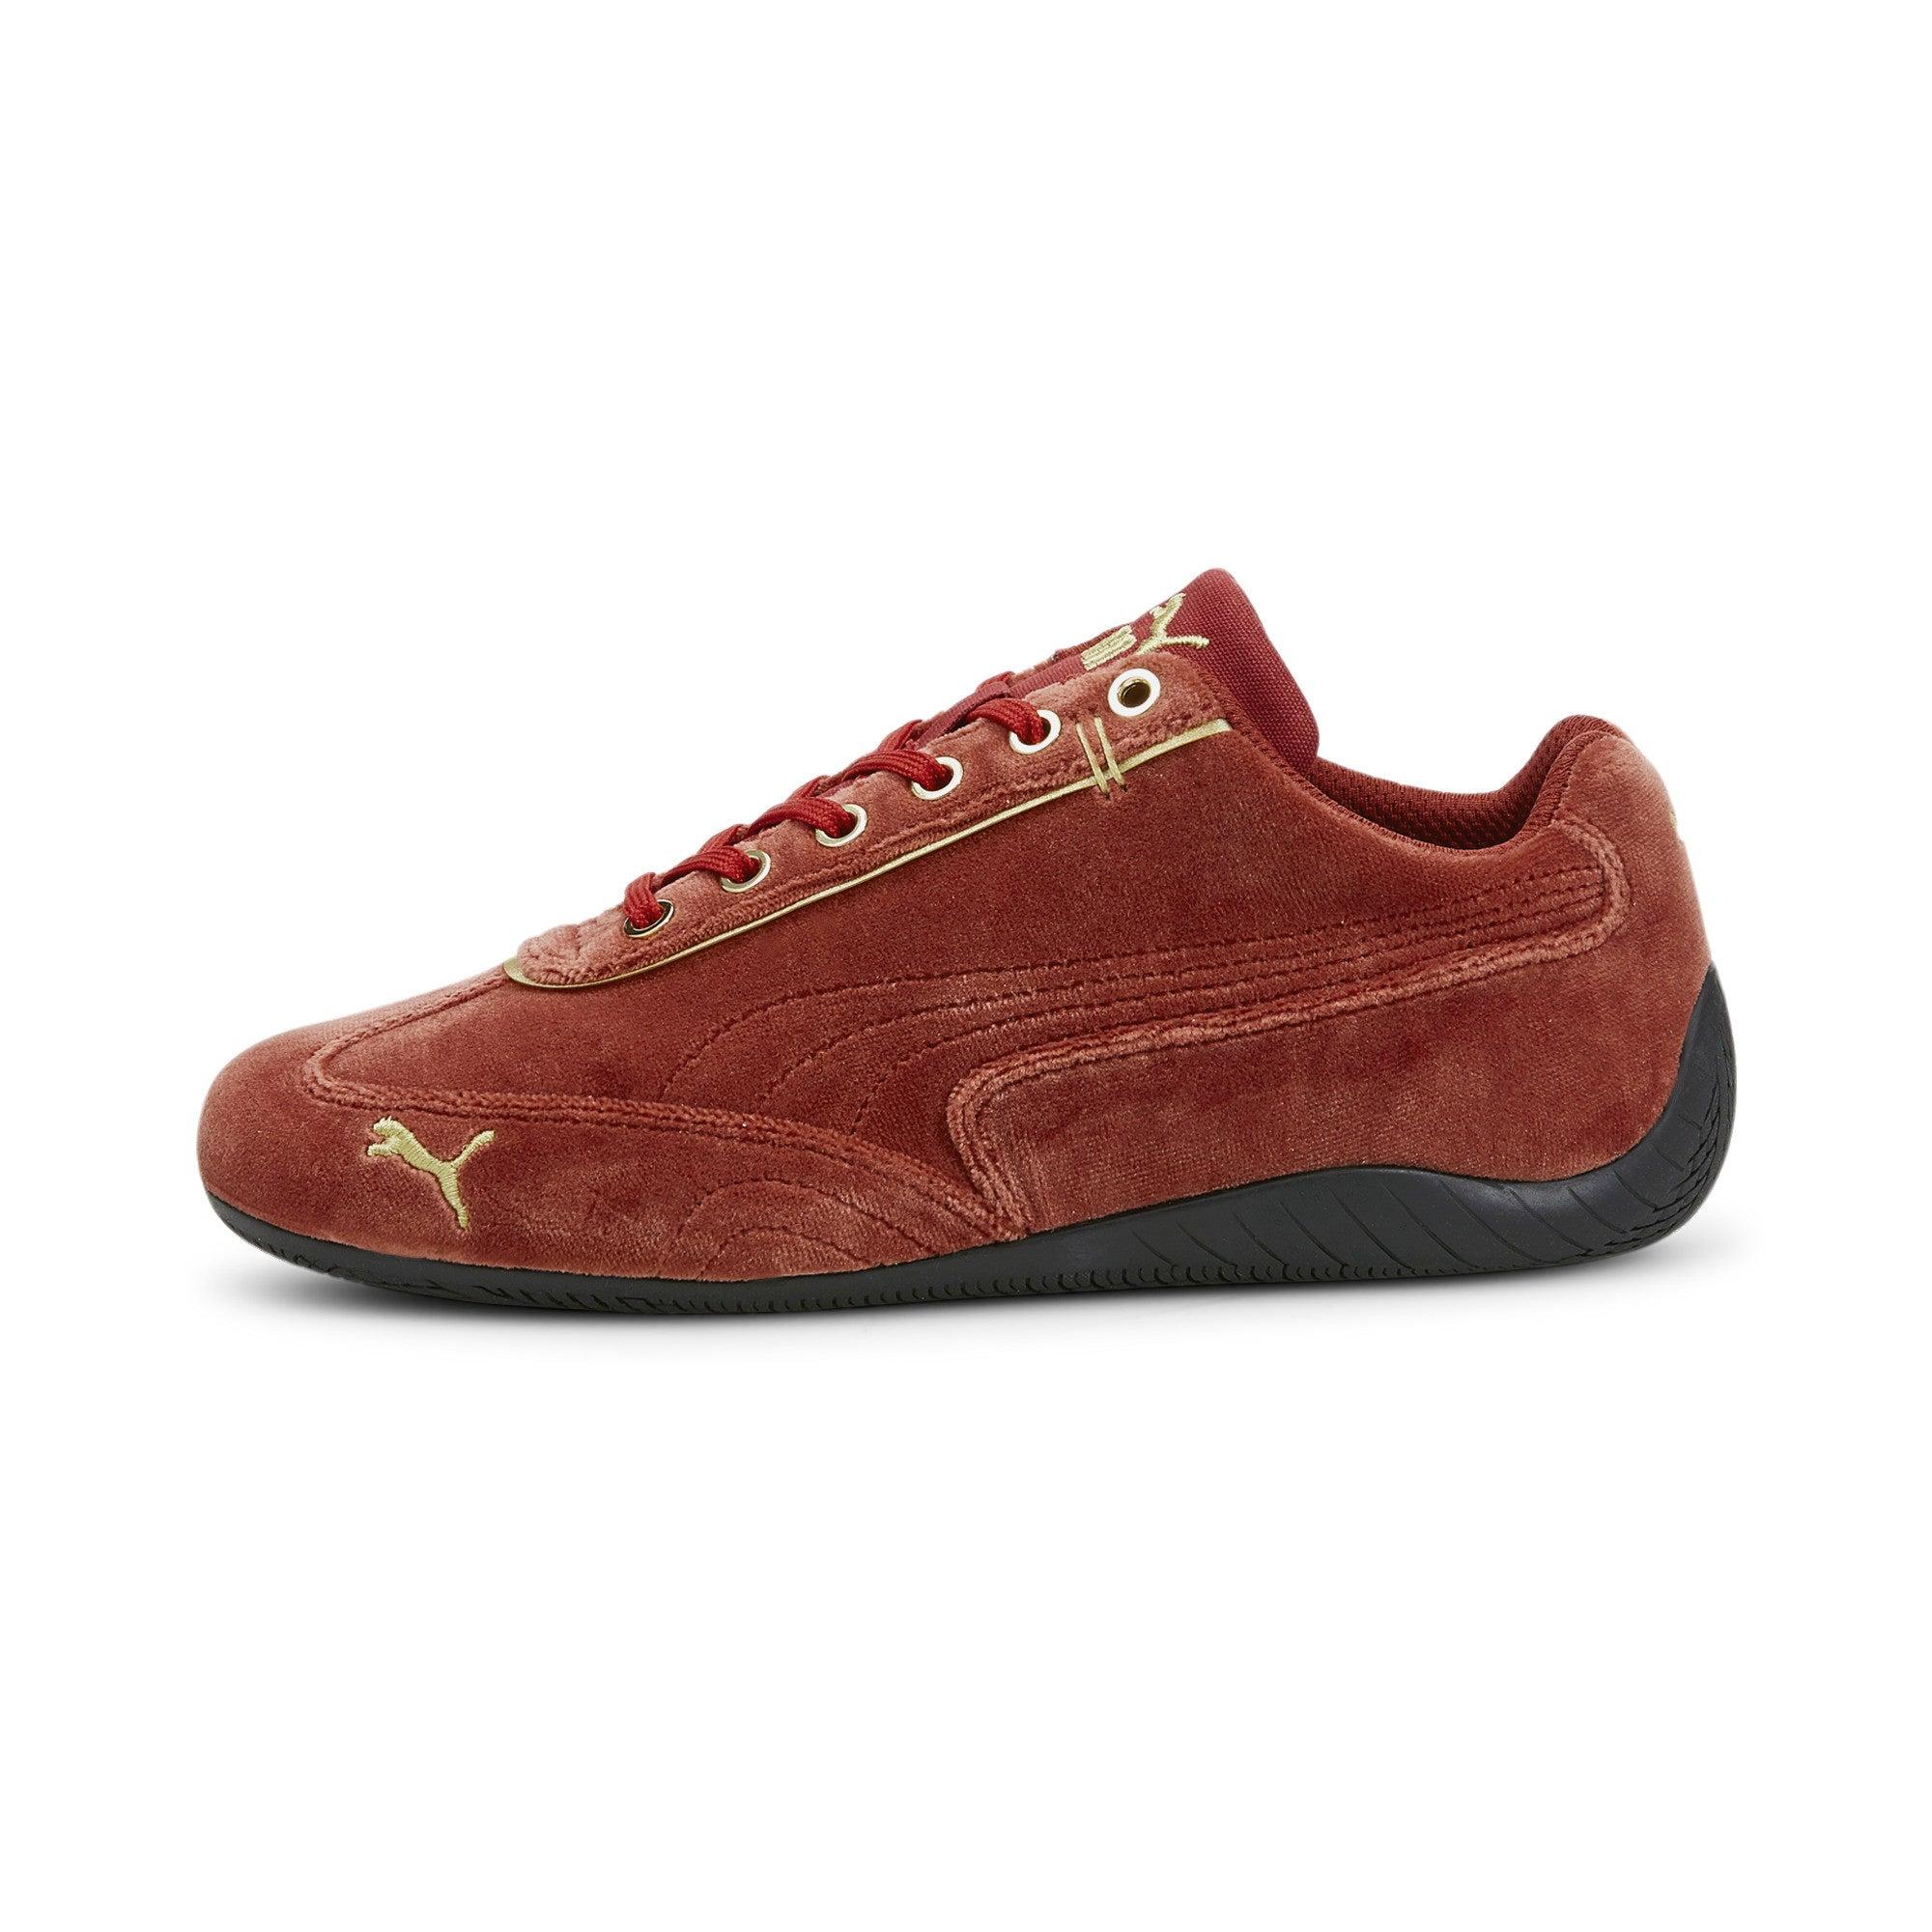 Plausible soborno Ruidoso PUMA Speedcat Velvet Driving Shoes in Red | Lyst